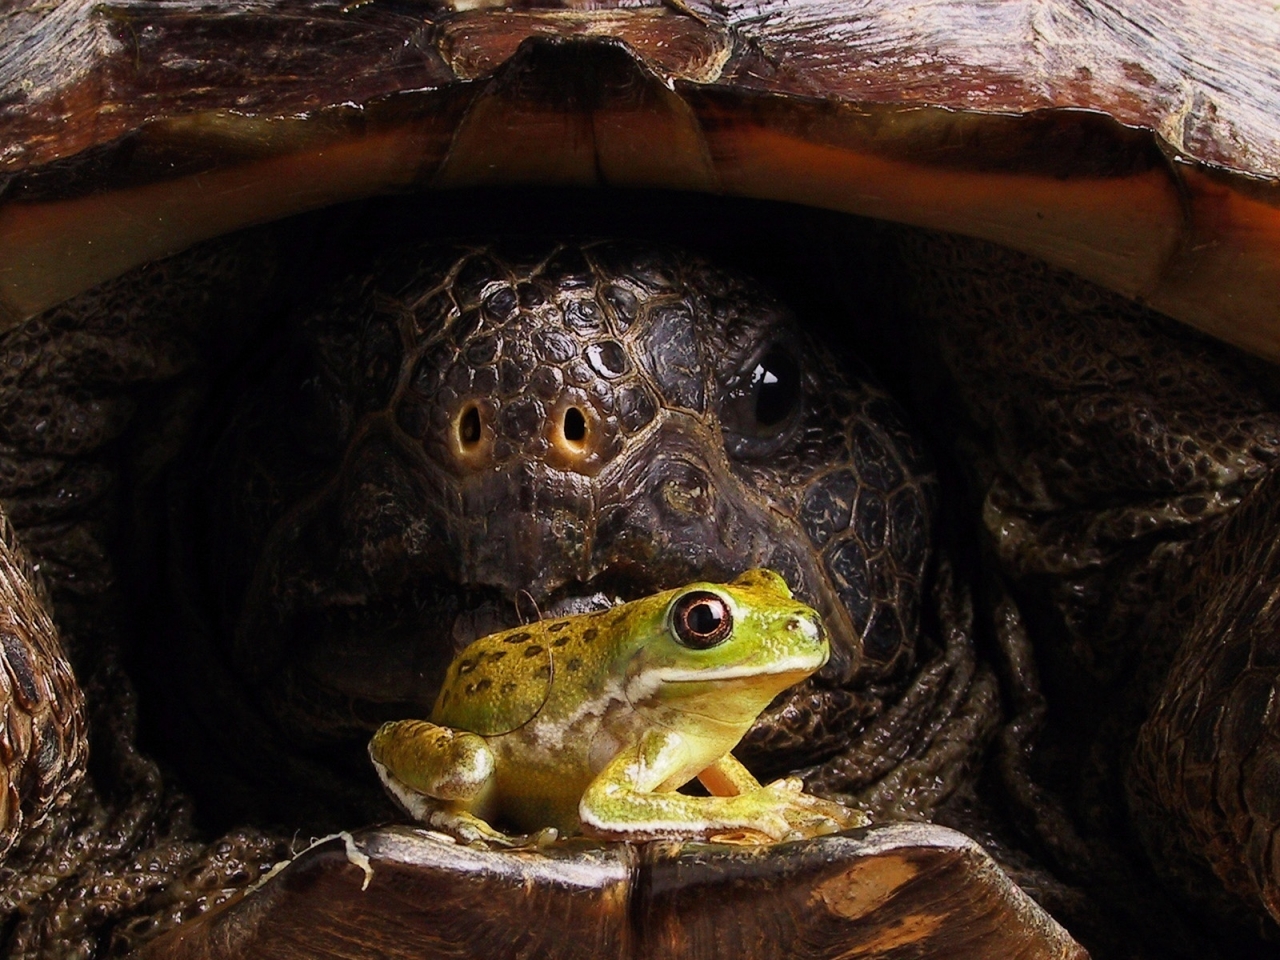 Big turtle and little frog for 1280 x 960 resolution